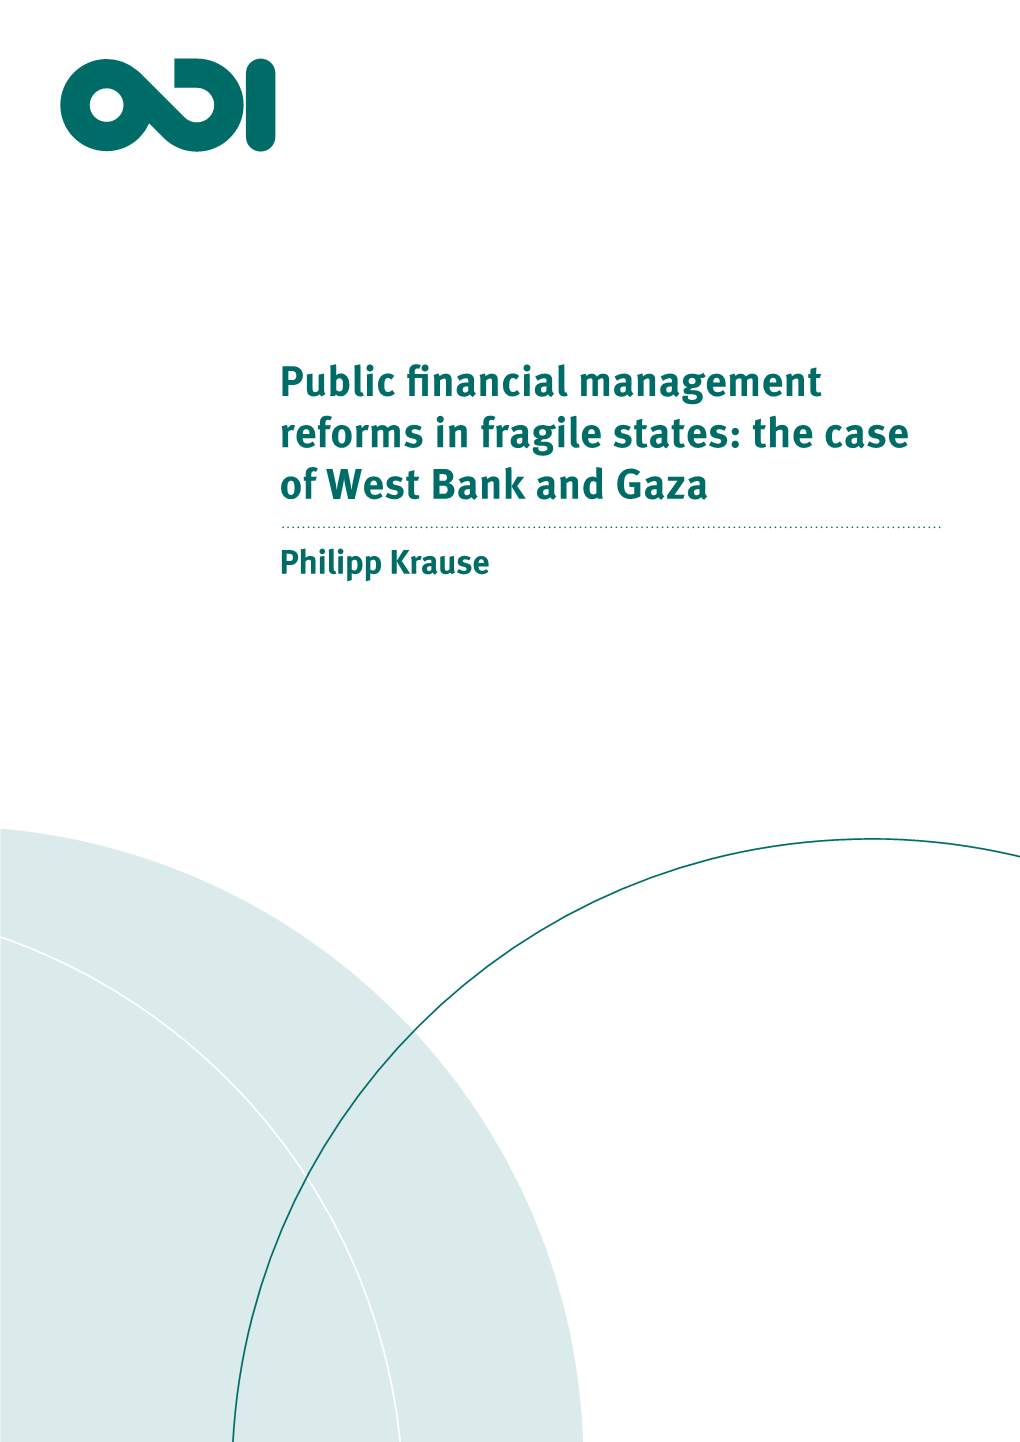 Public Financial Management Reforms in Fragile States: the Case of West Bank and Gaza